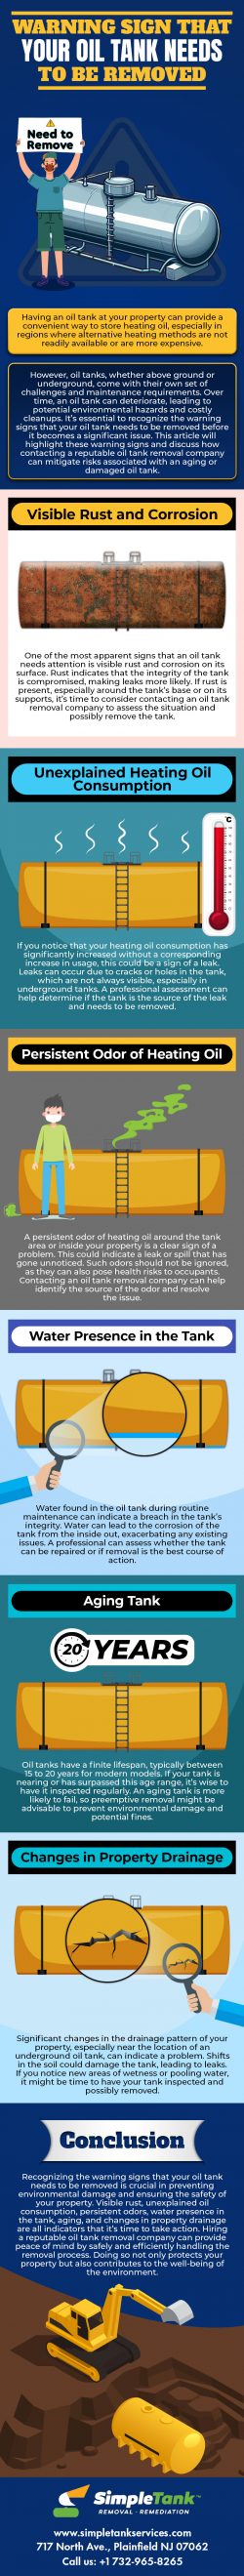 Warning Signs That Your Oil Tank Needs to Be Removed